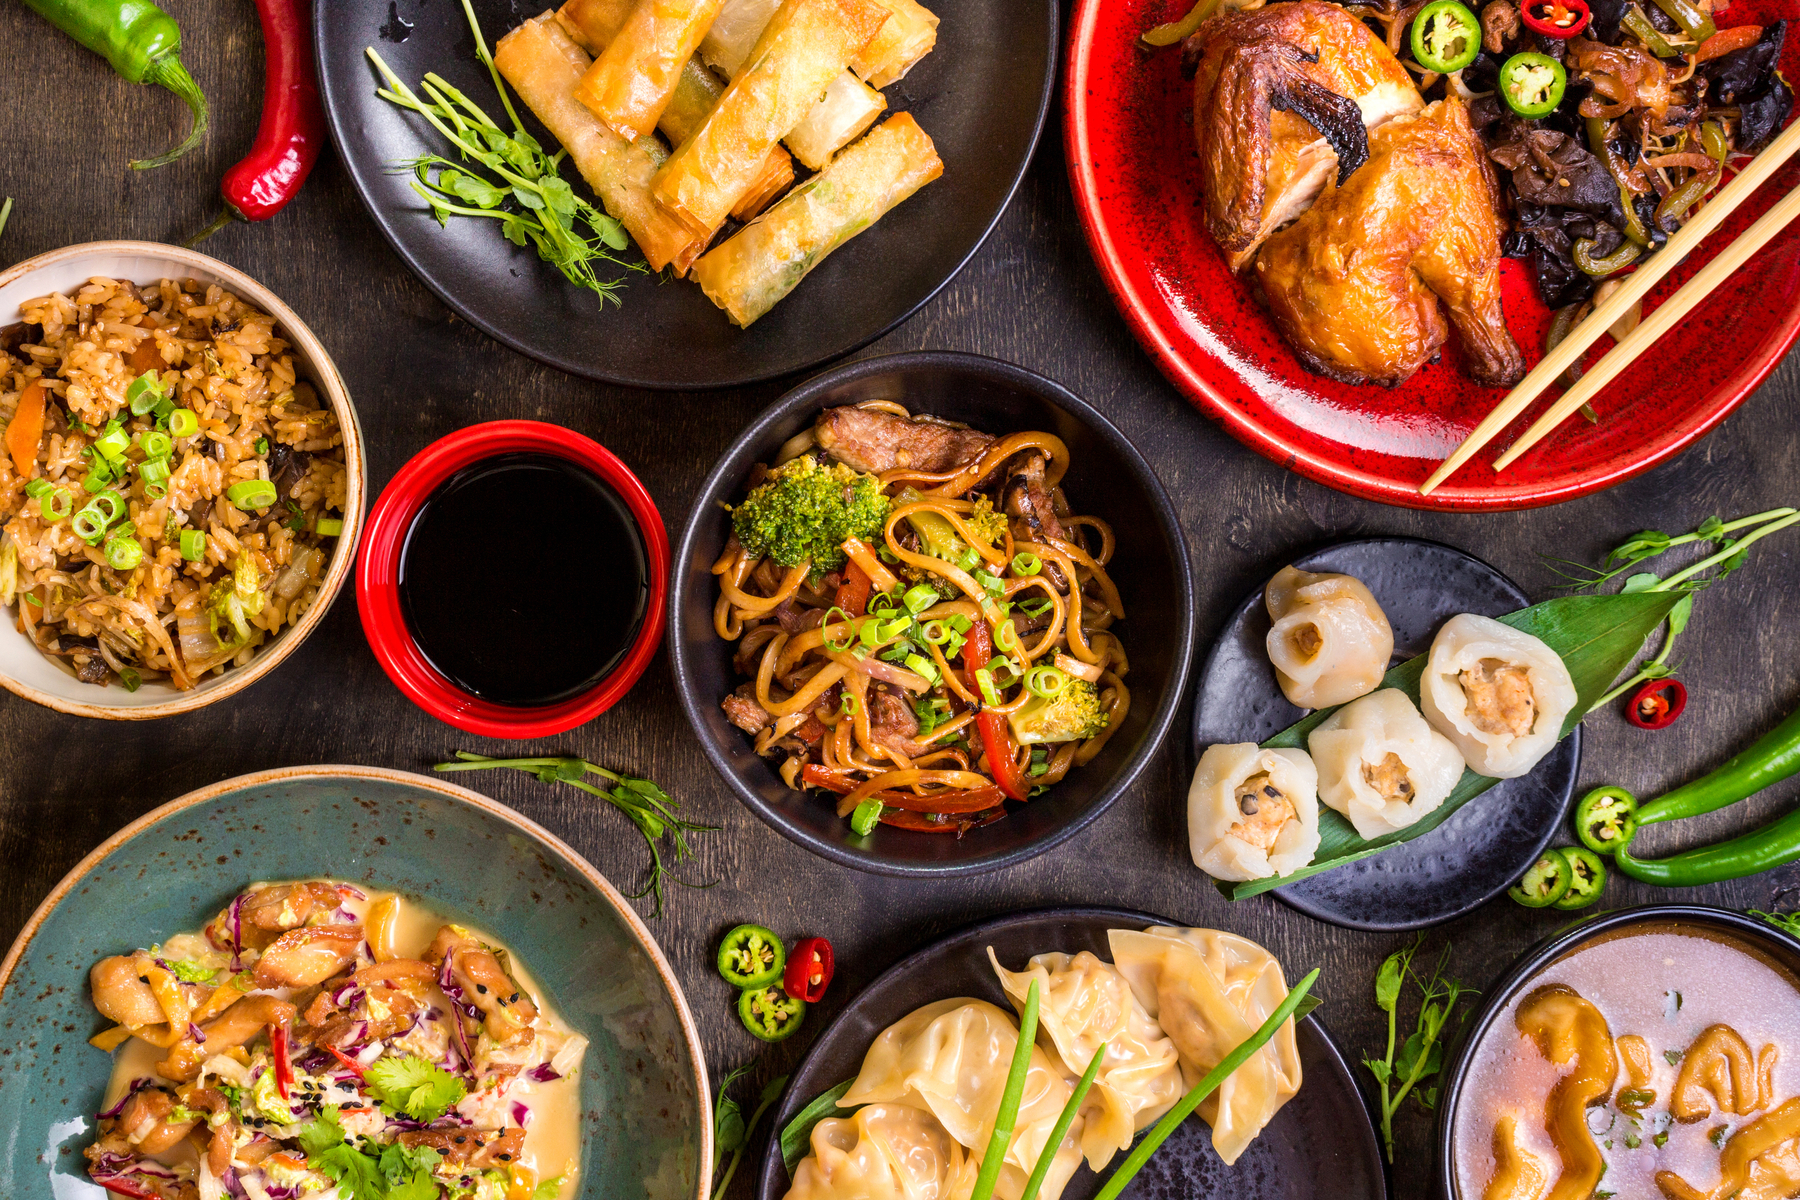 An assortment of different Chinese dishes